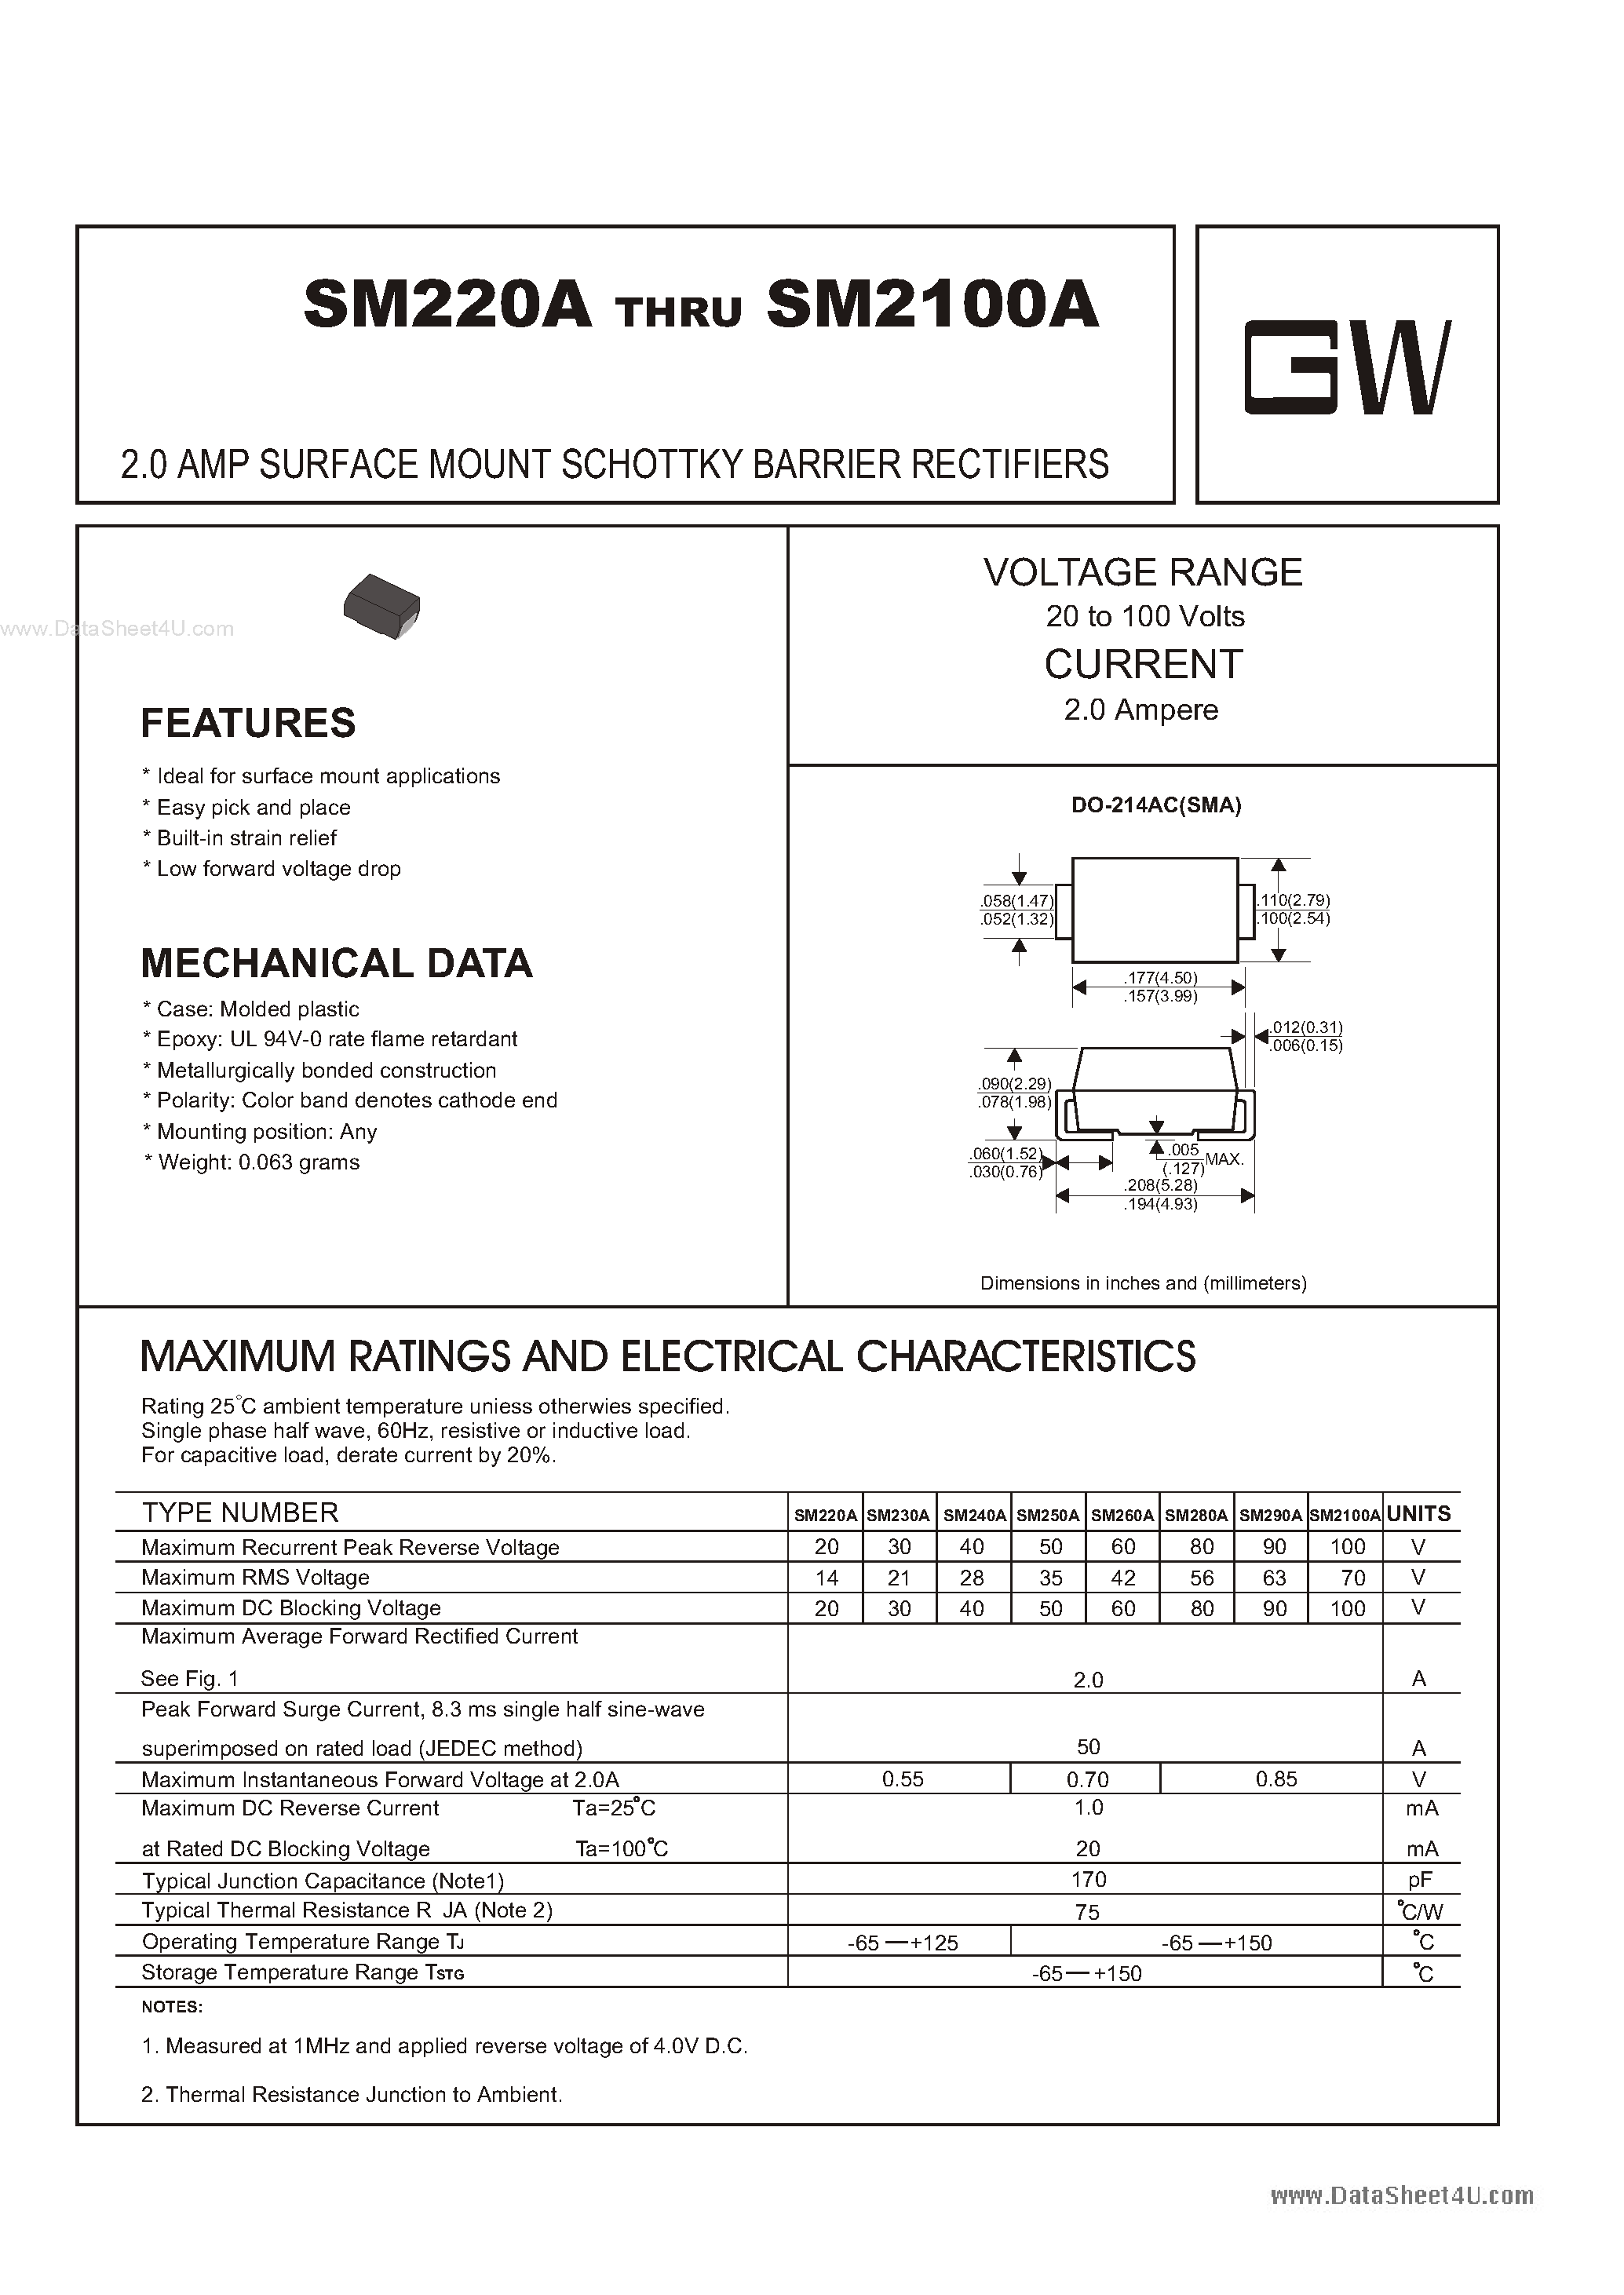 Datasheet SM2100A - (SM220A - SM2100A) 2.0 AMP SURFACE MOUNT SCHOTTKY BARRIER RECTIFIERS page 1